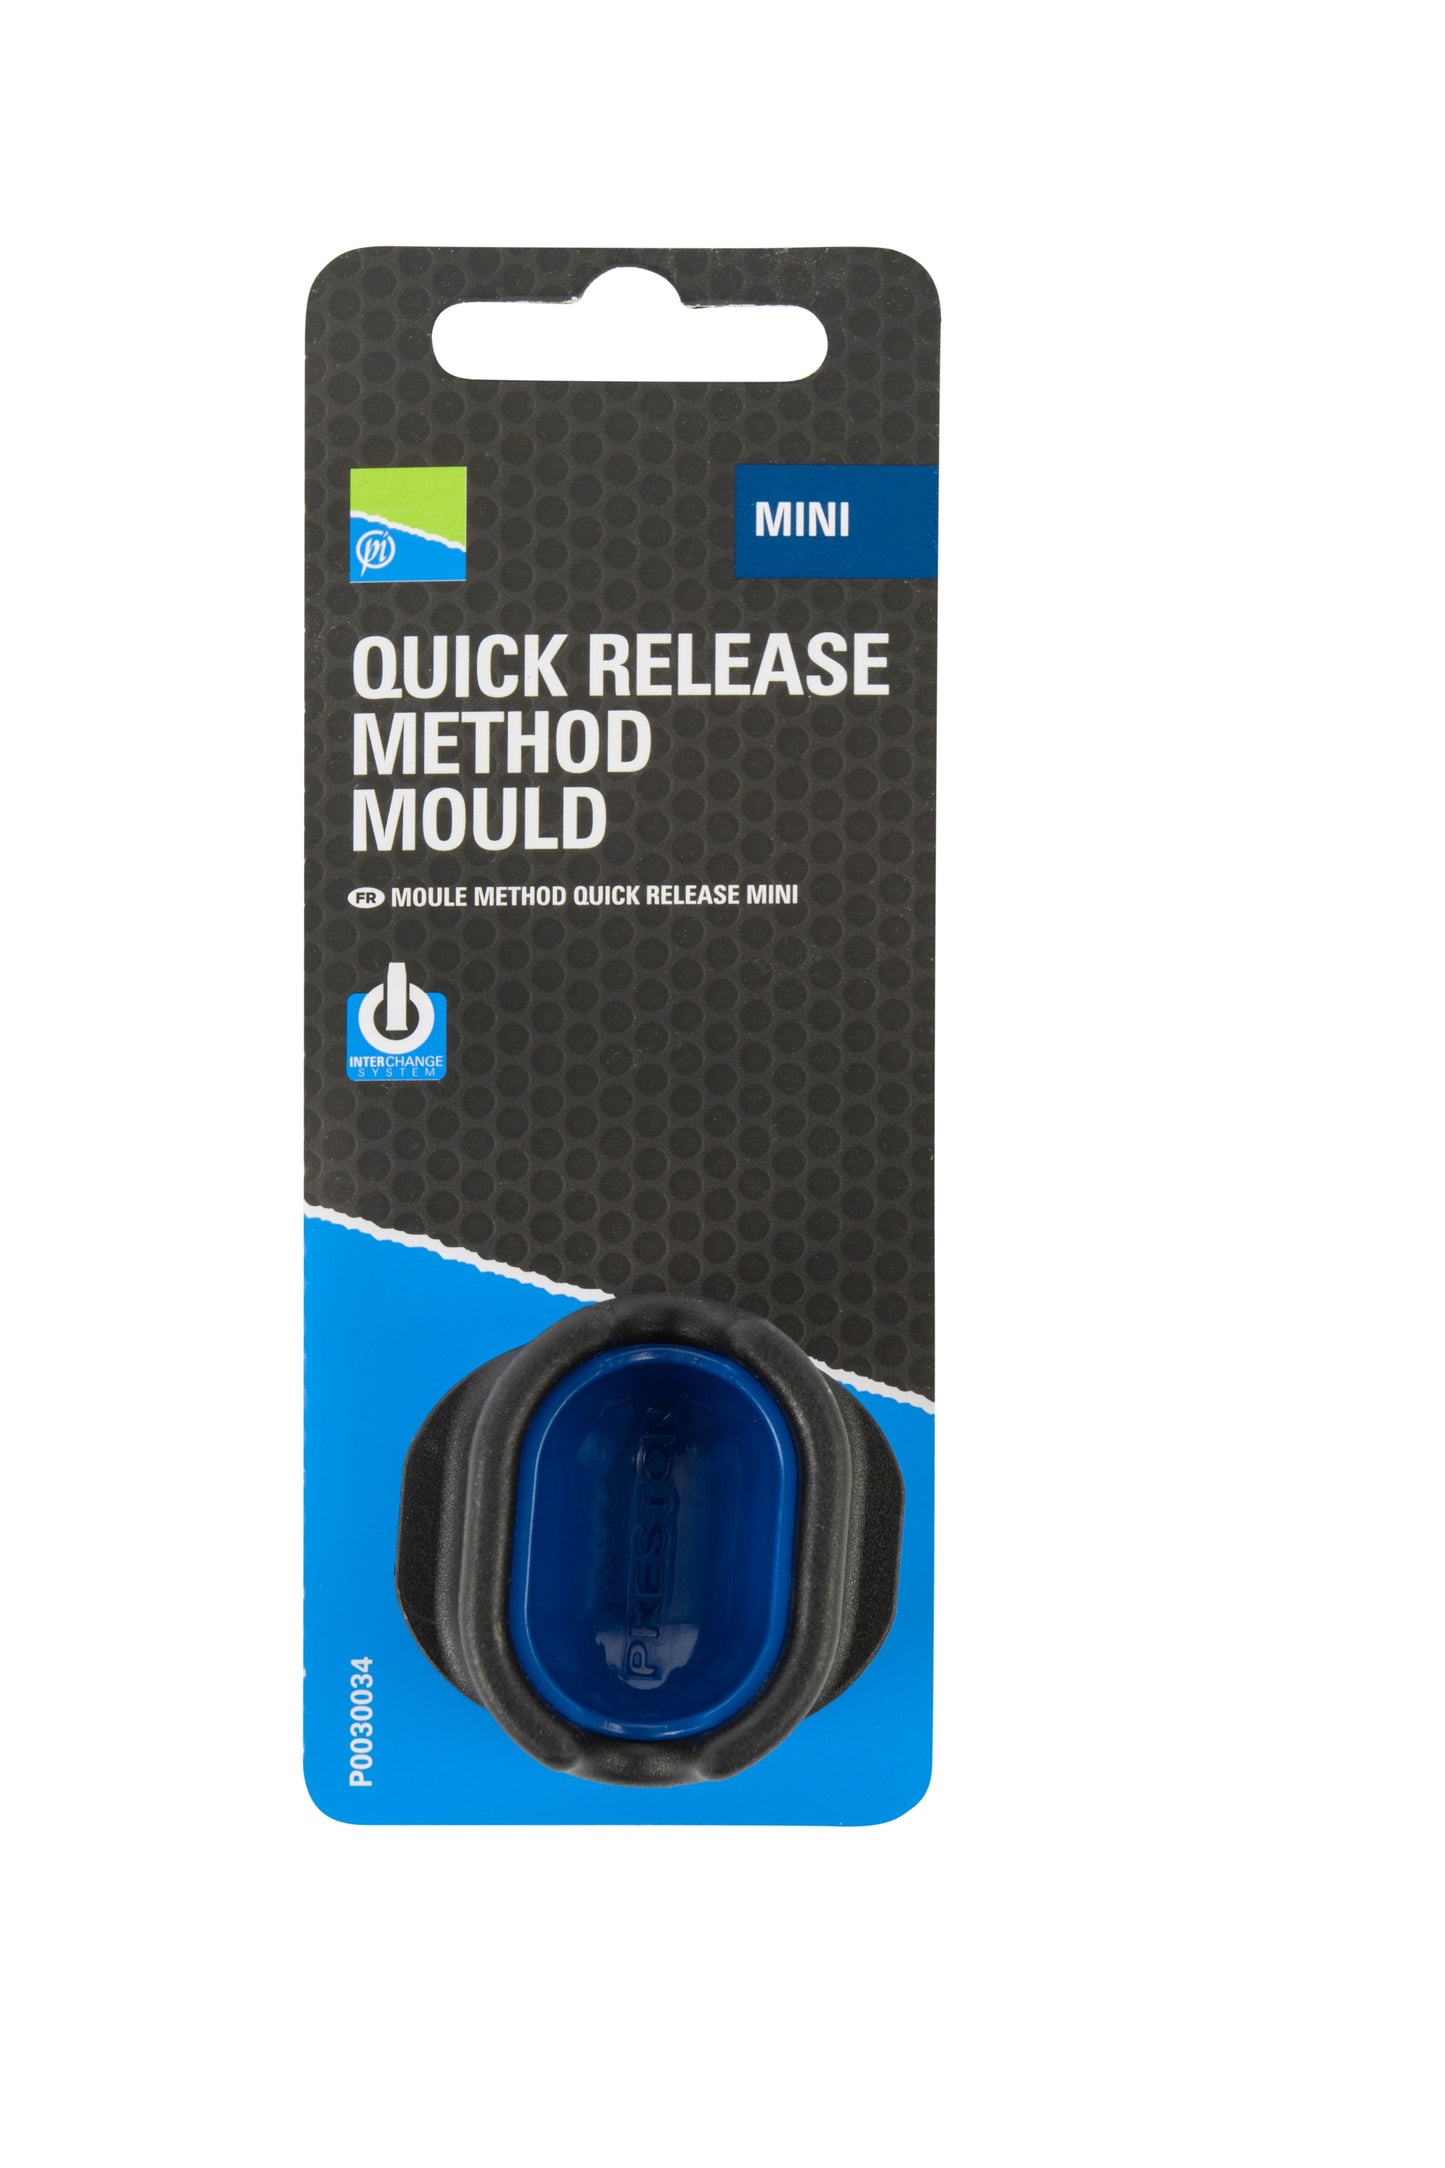 Preston Innovations Quick Release Method Moulds